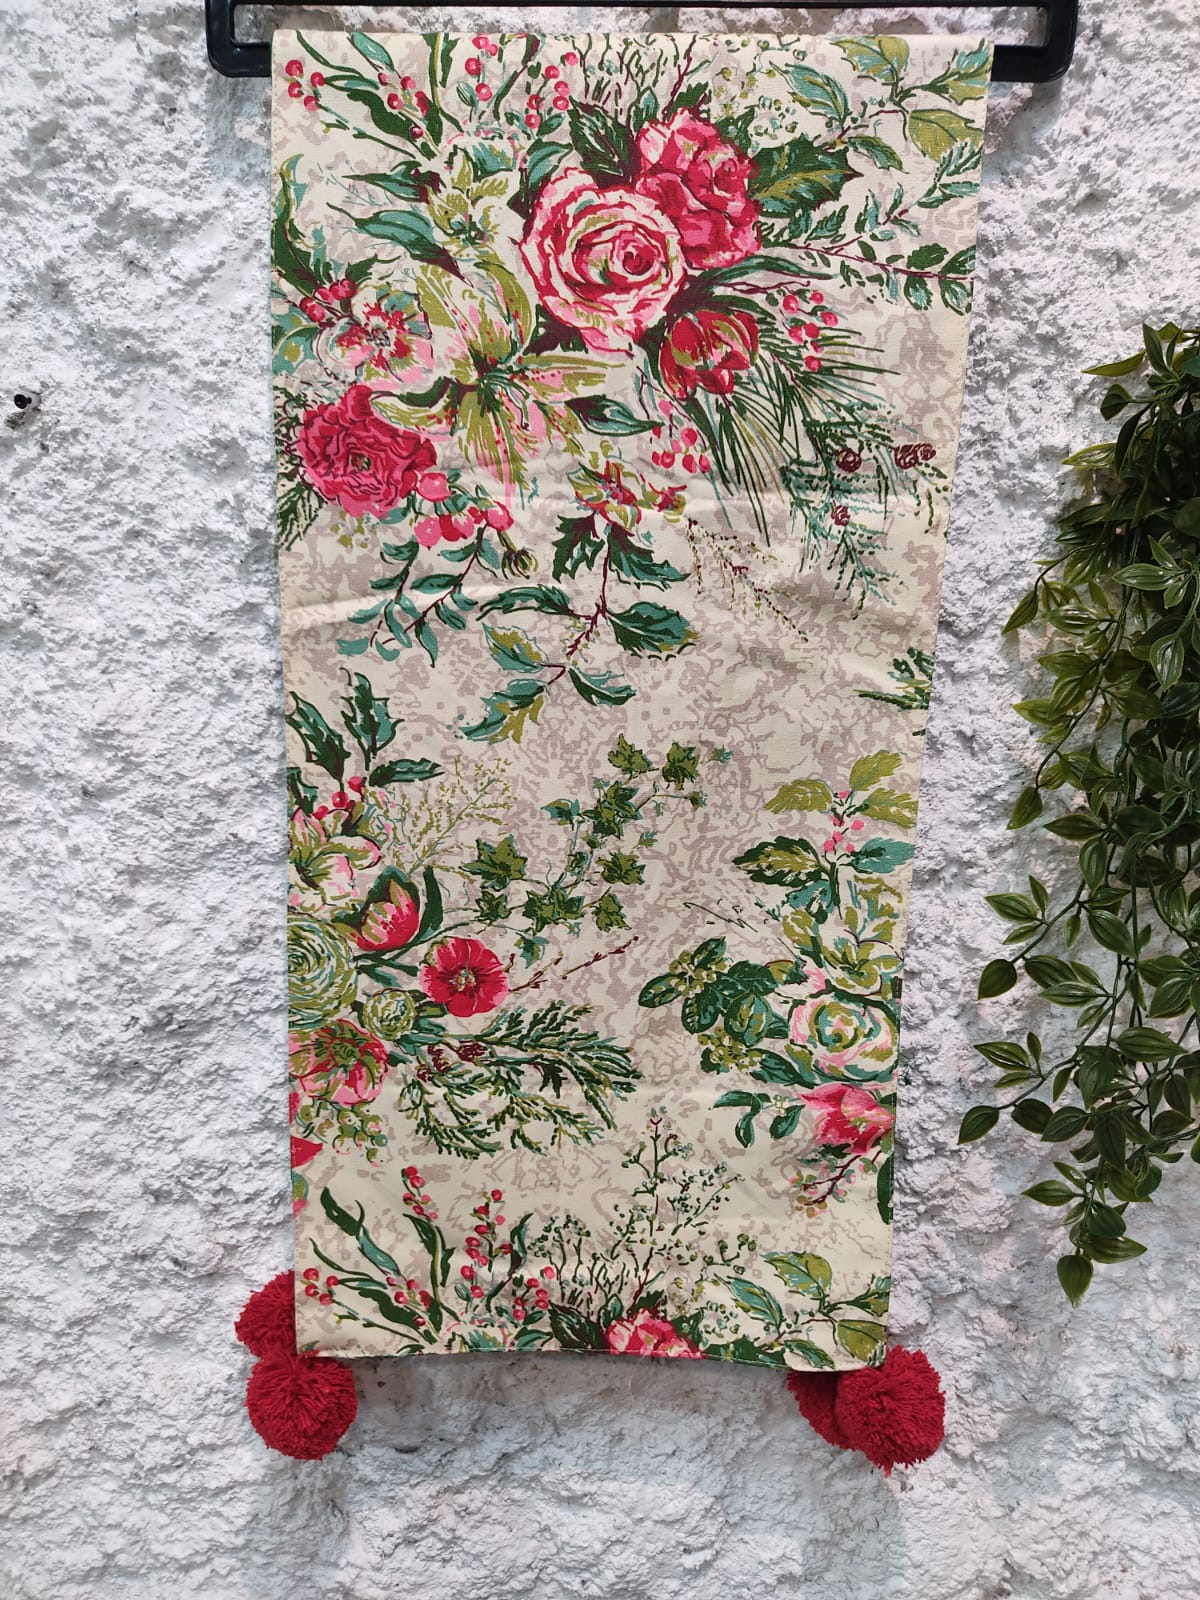 Printed Cotton Table Runners | 30cm x 182cm (12" x 72")